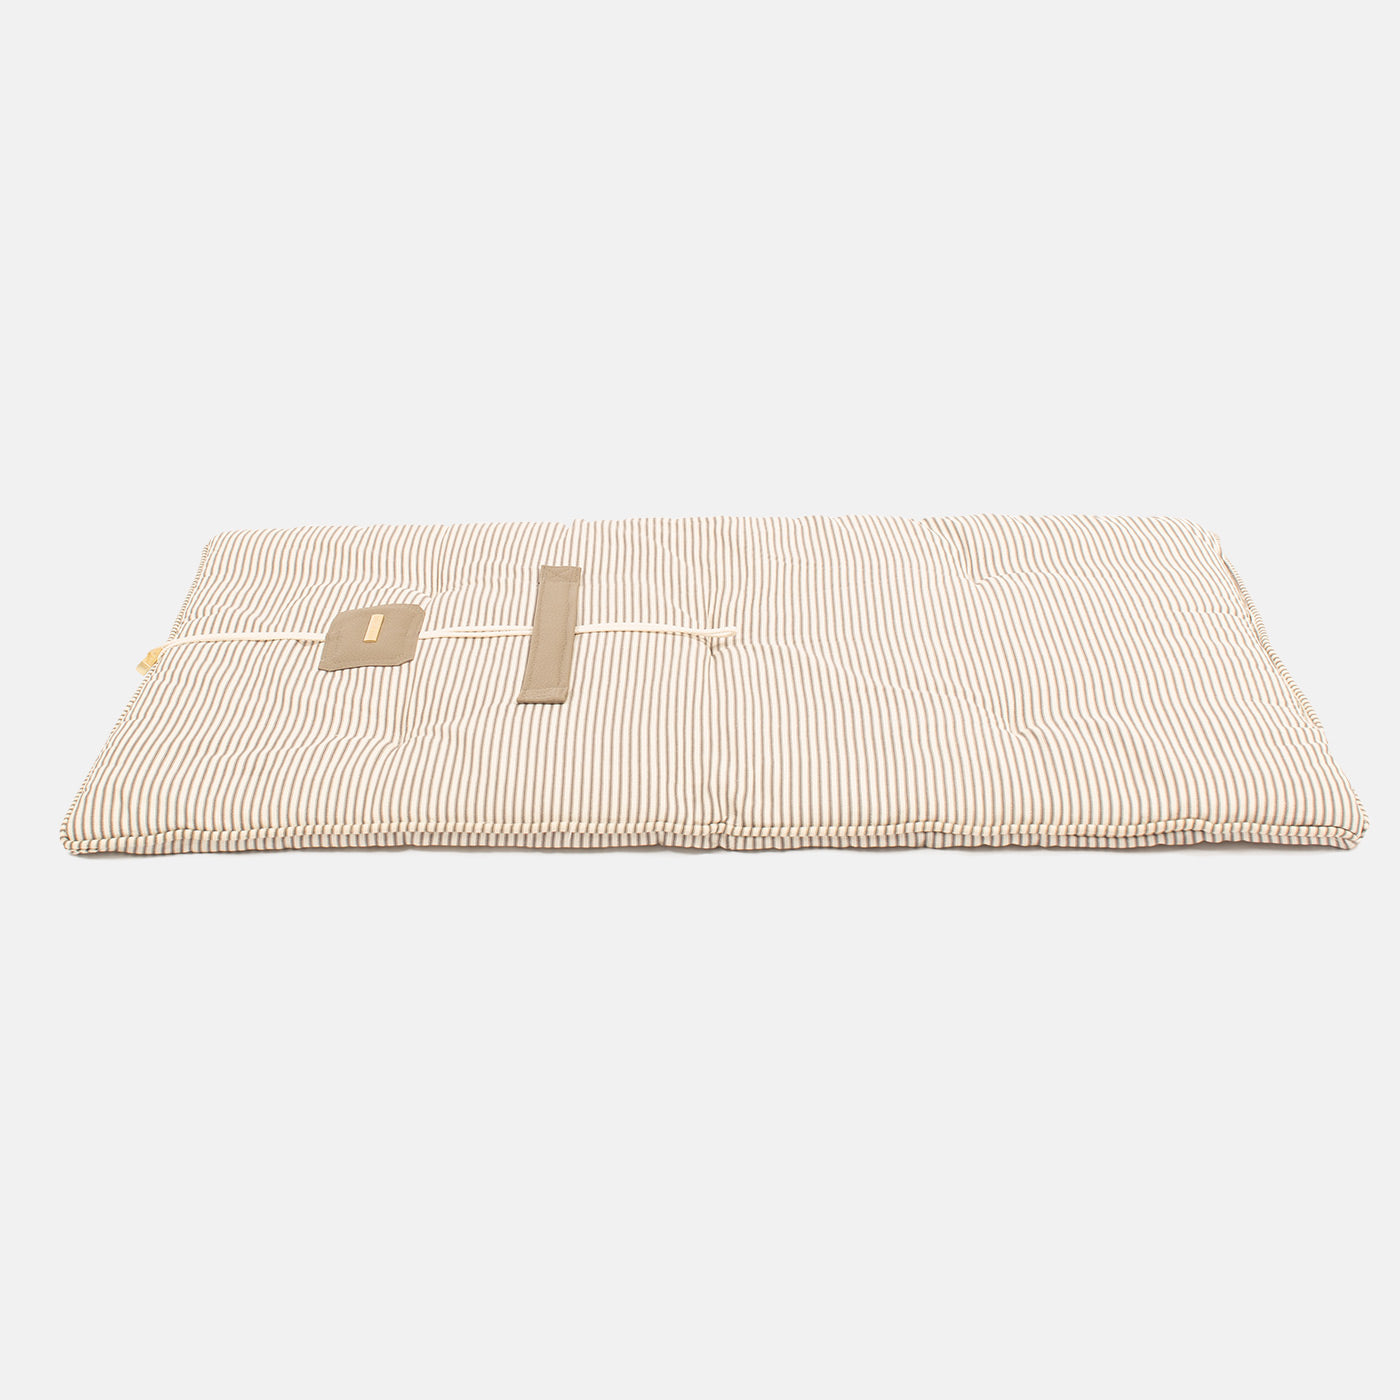 Embark on the perfect pet travel with our luxury Travel Mat in Regency Stripe. Featuring a Carry handle for on the move once Rolled up for easy storage, can be used as a seat cover, boot mat or travel bed! Available now at Lords & Labradors US